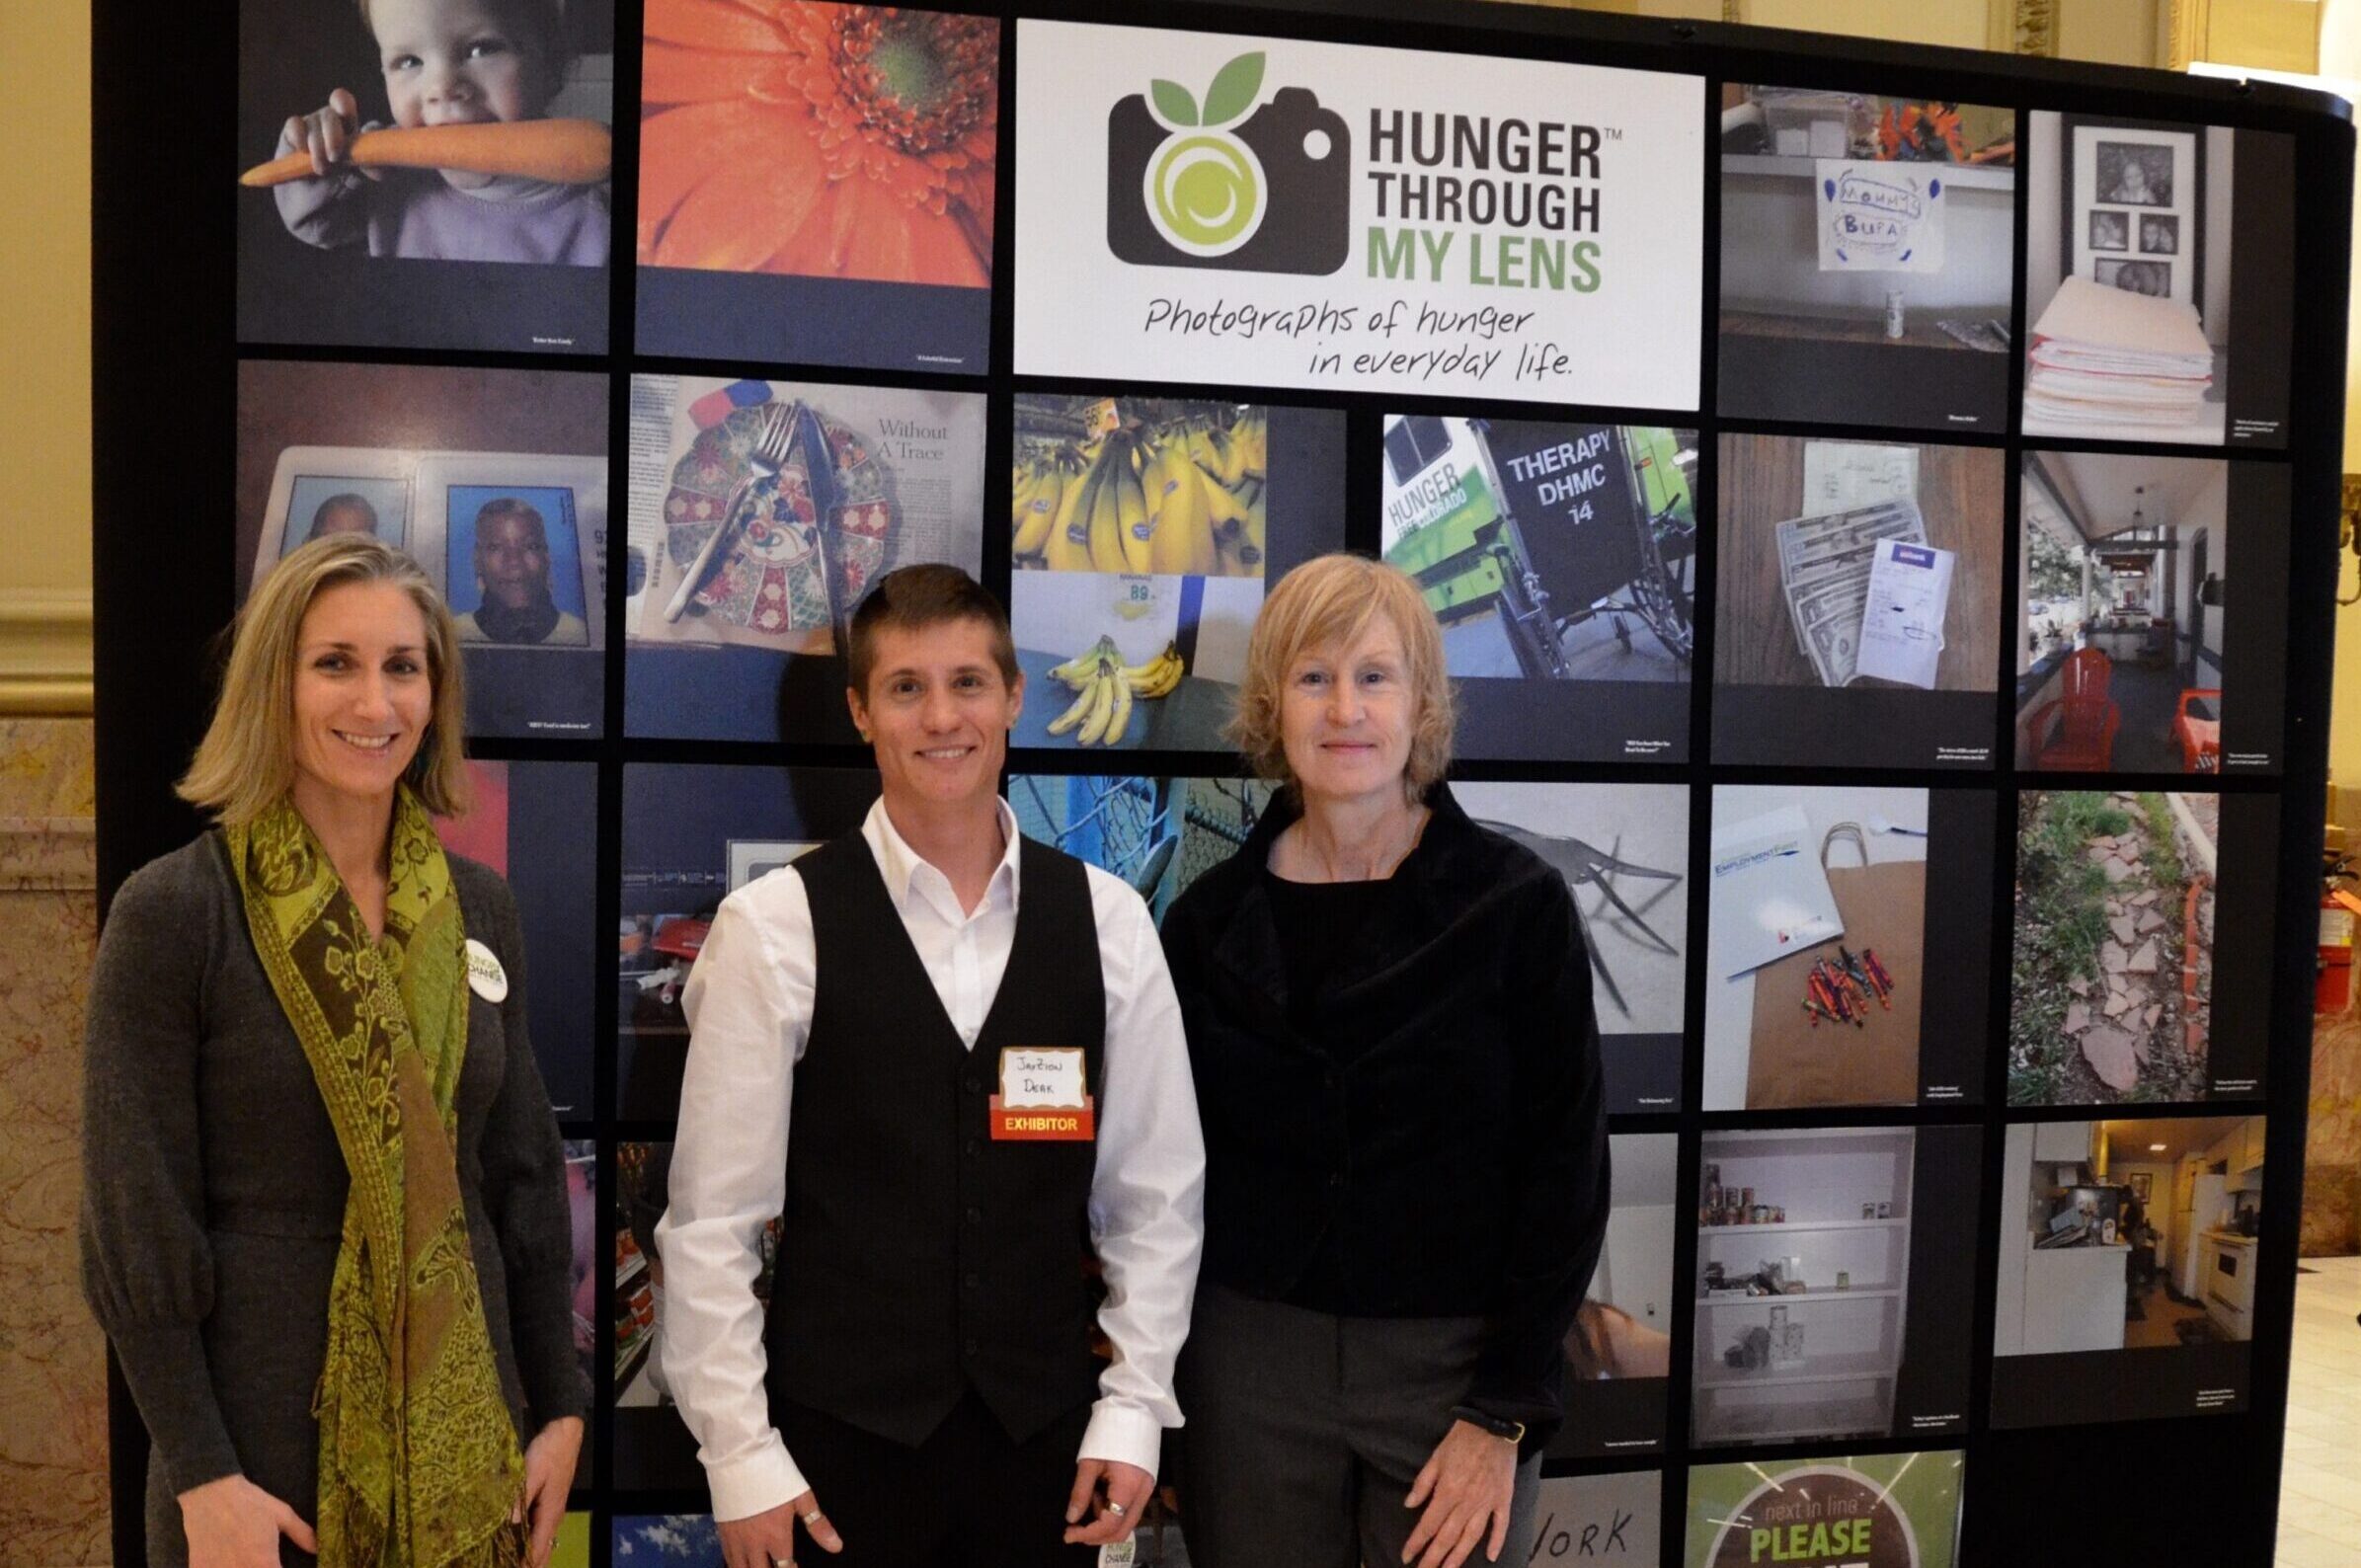 three people standing in front of exhibit of hunger through my lens photos